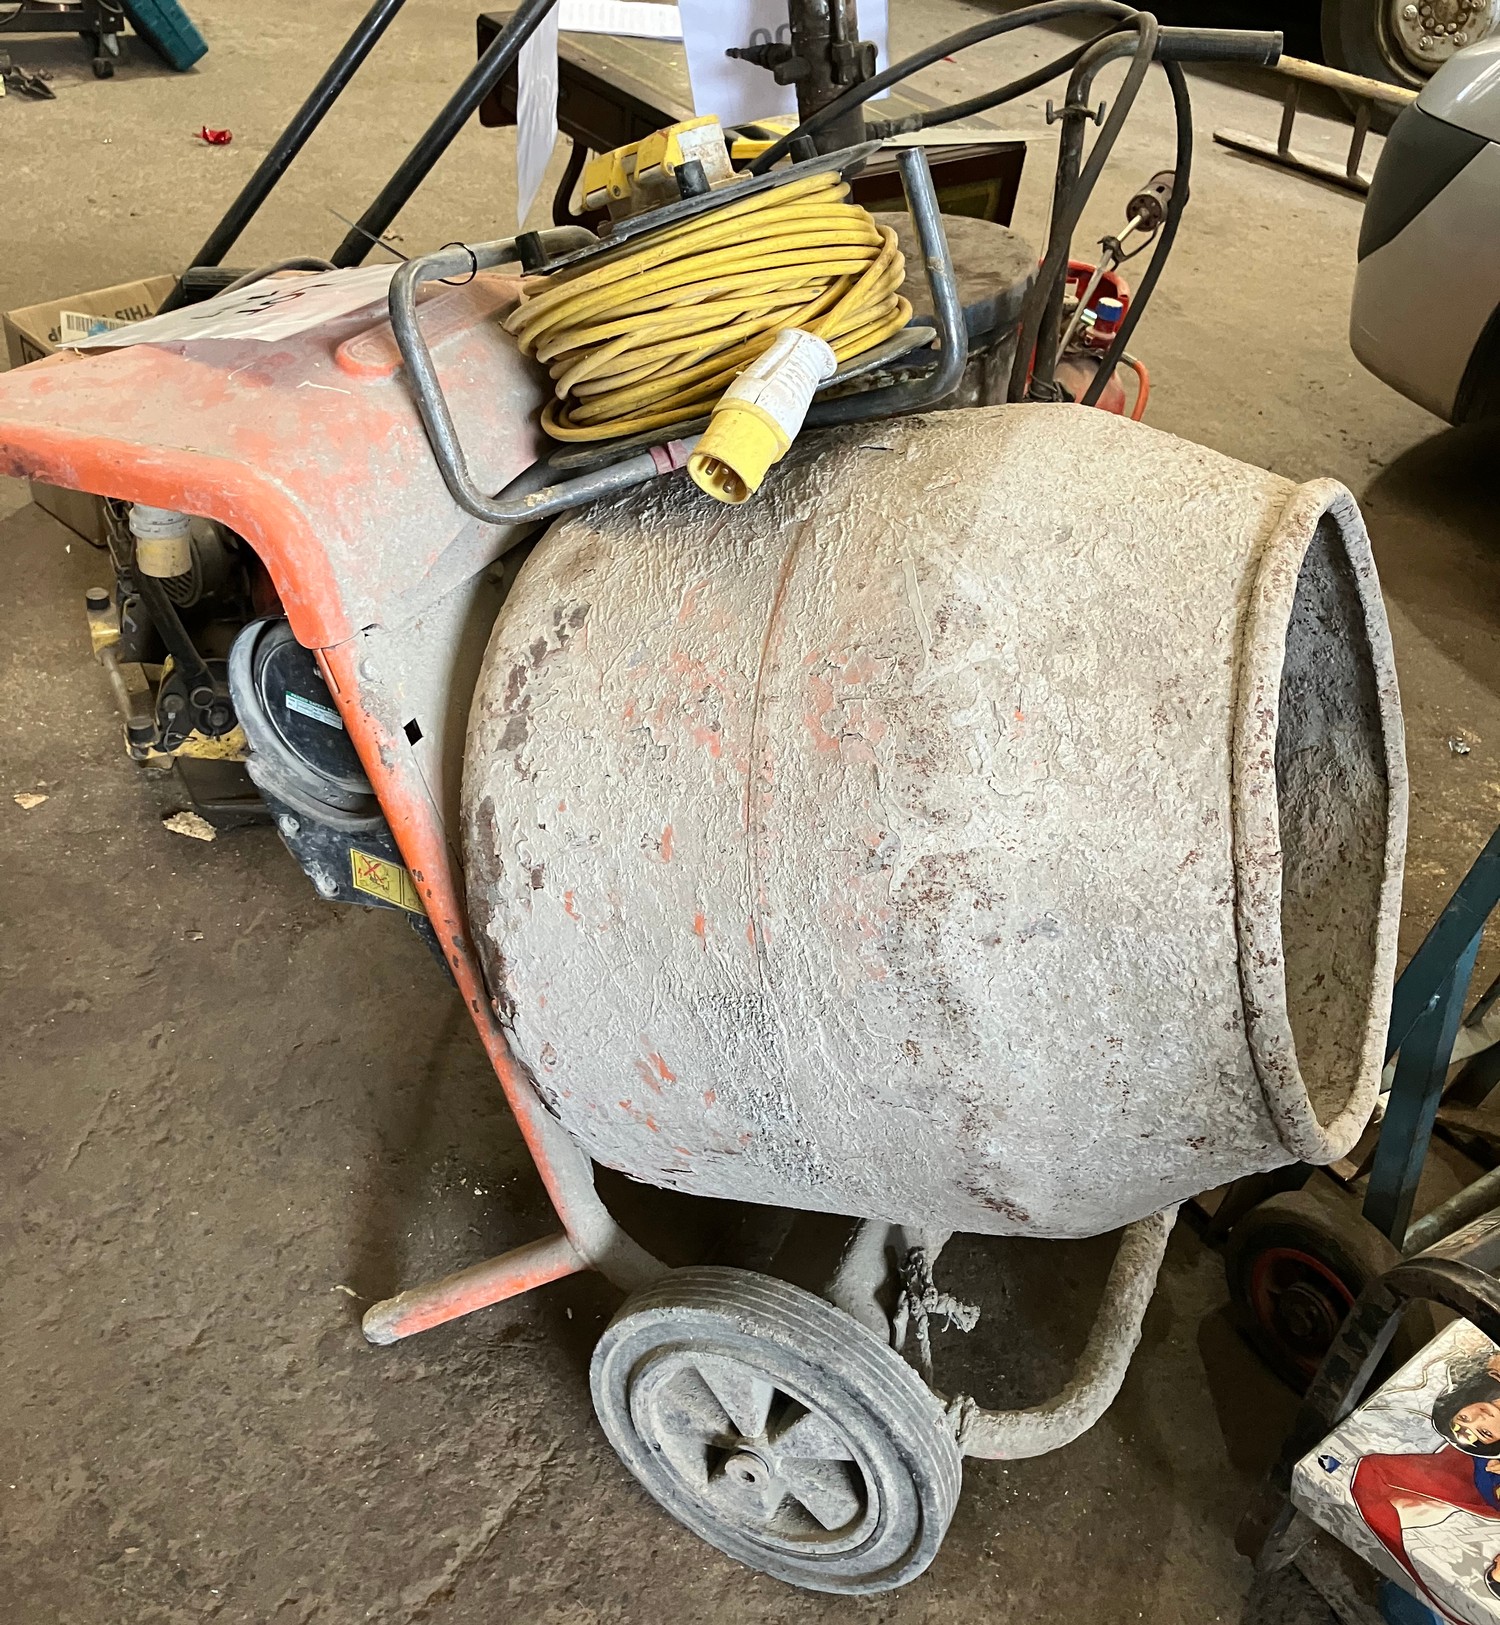 Belle cement mixer and extension cable - Minimix 150